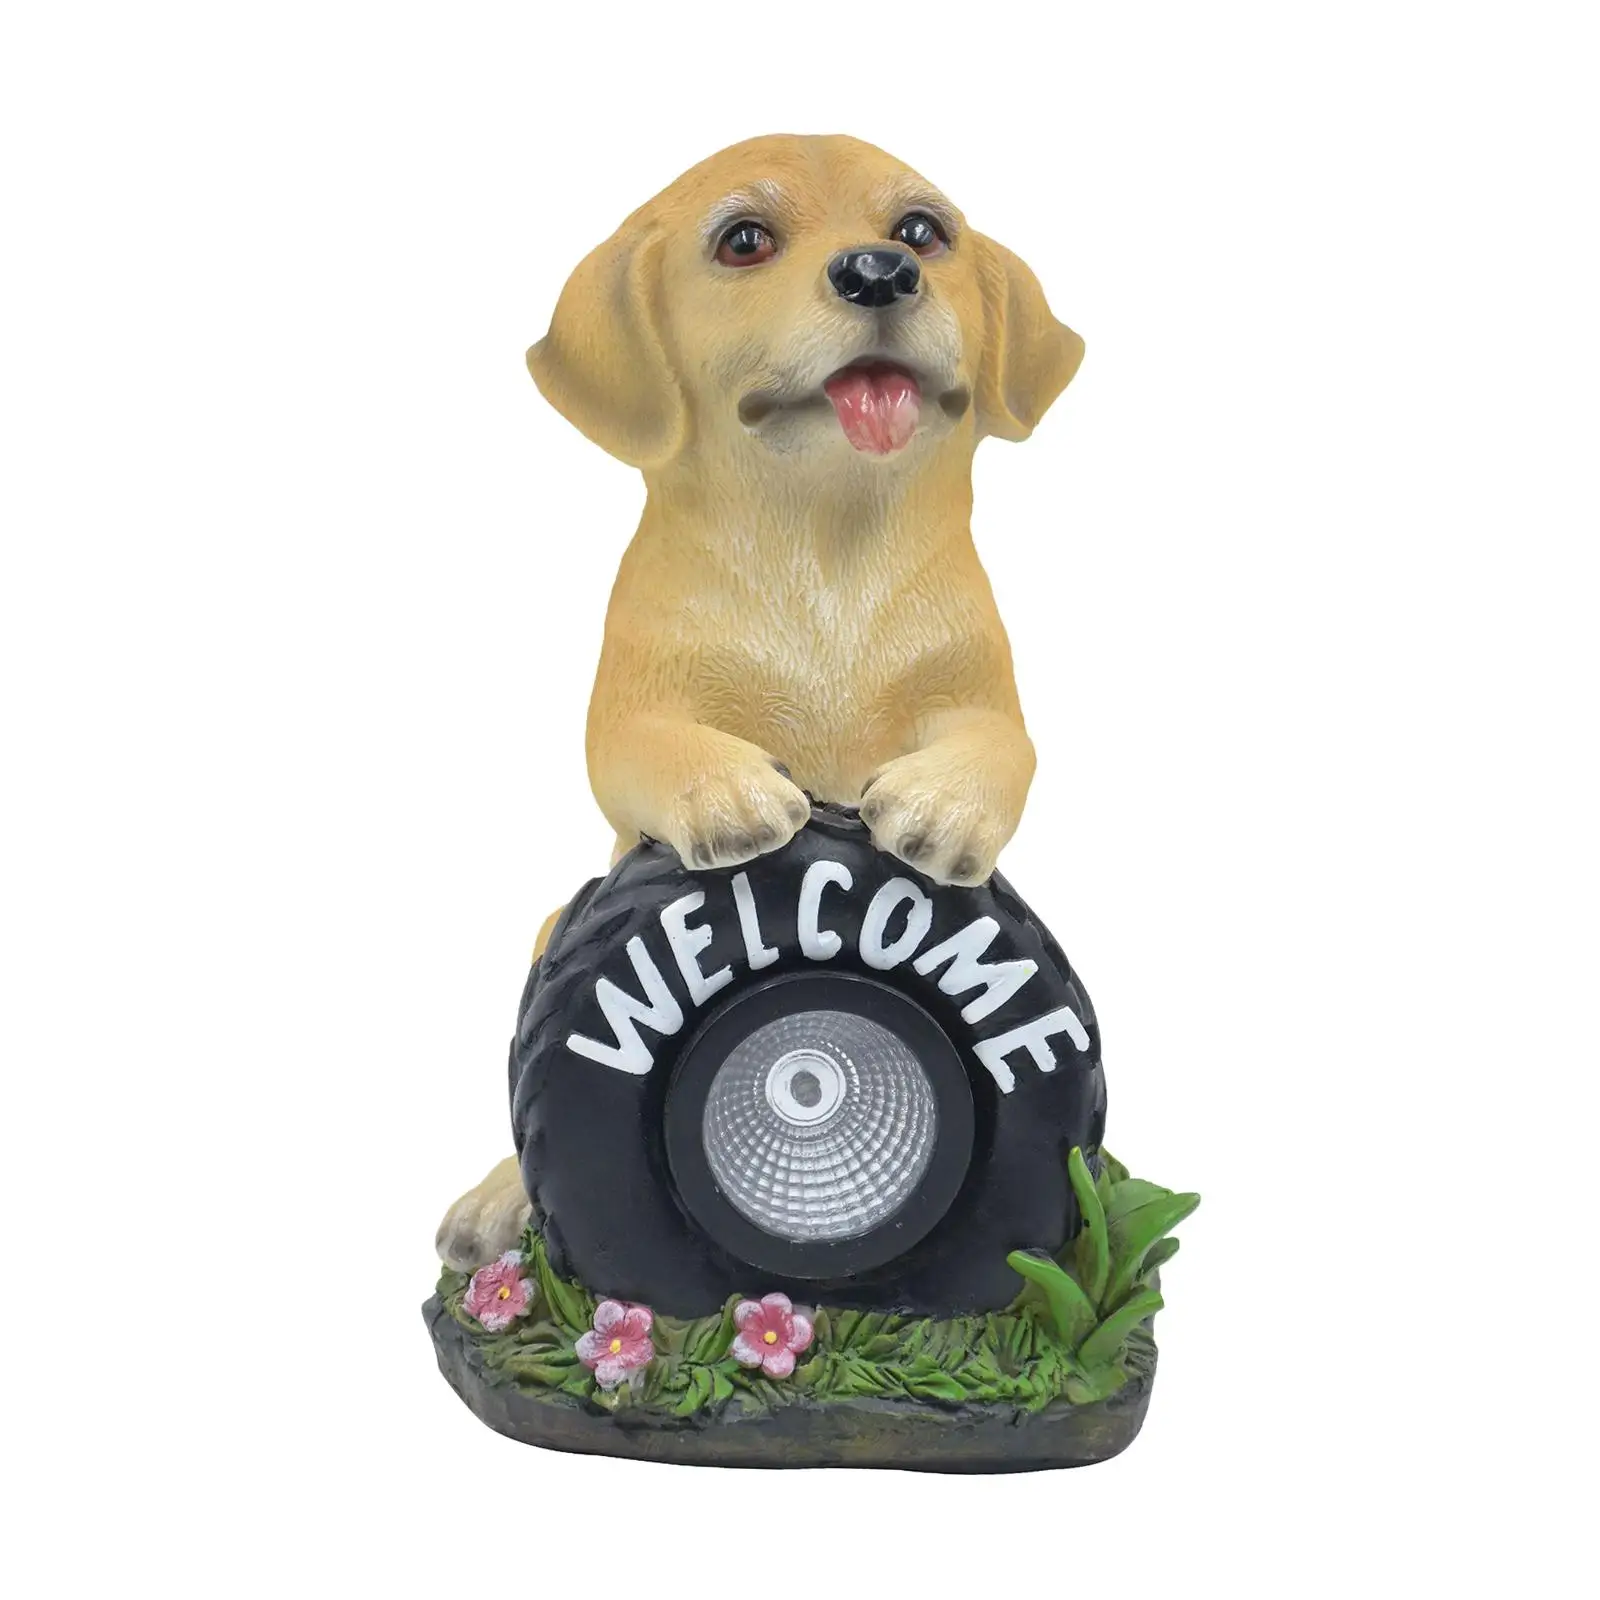 Solar Puppy Statue Ornament Solar Powered Resin Sculpture for Lawn Patio Porch Yard